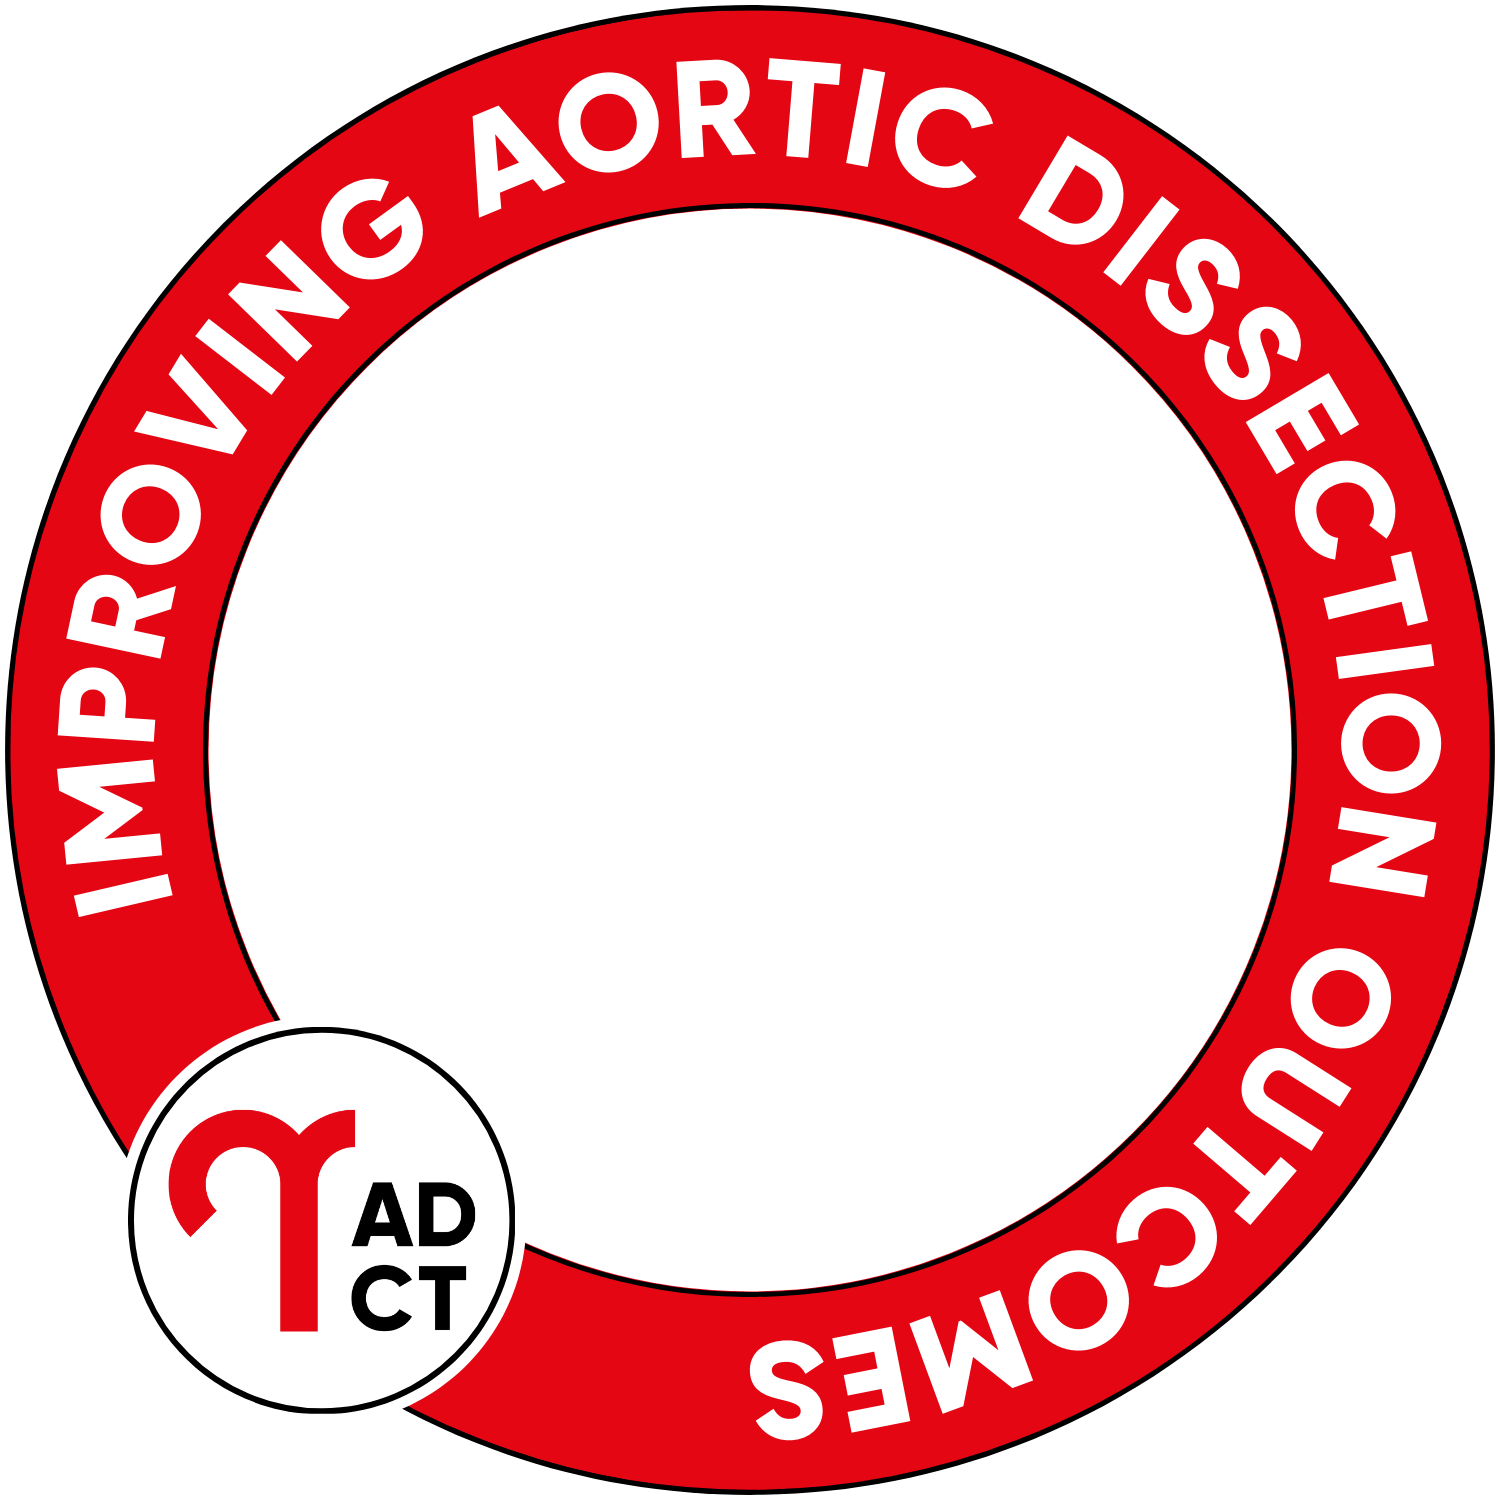 Aortic Dissection Supporter Profile Frame